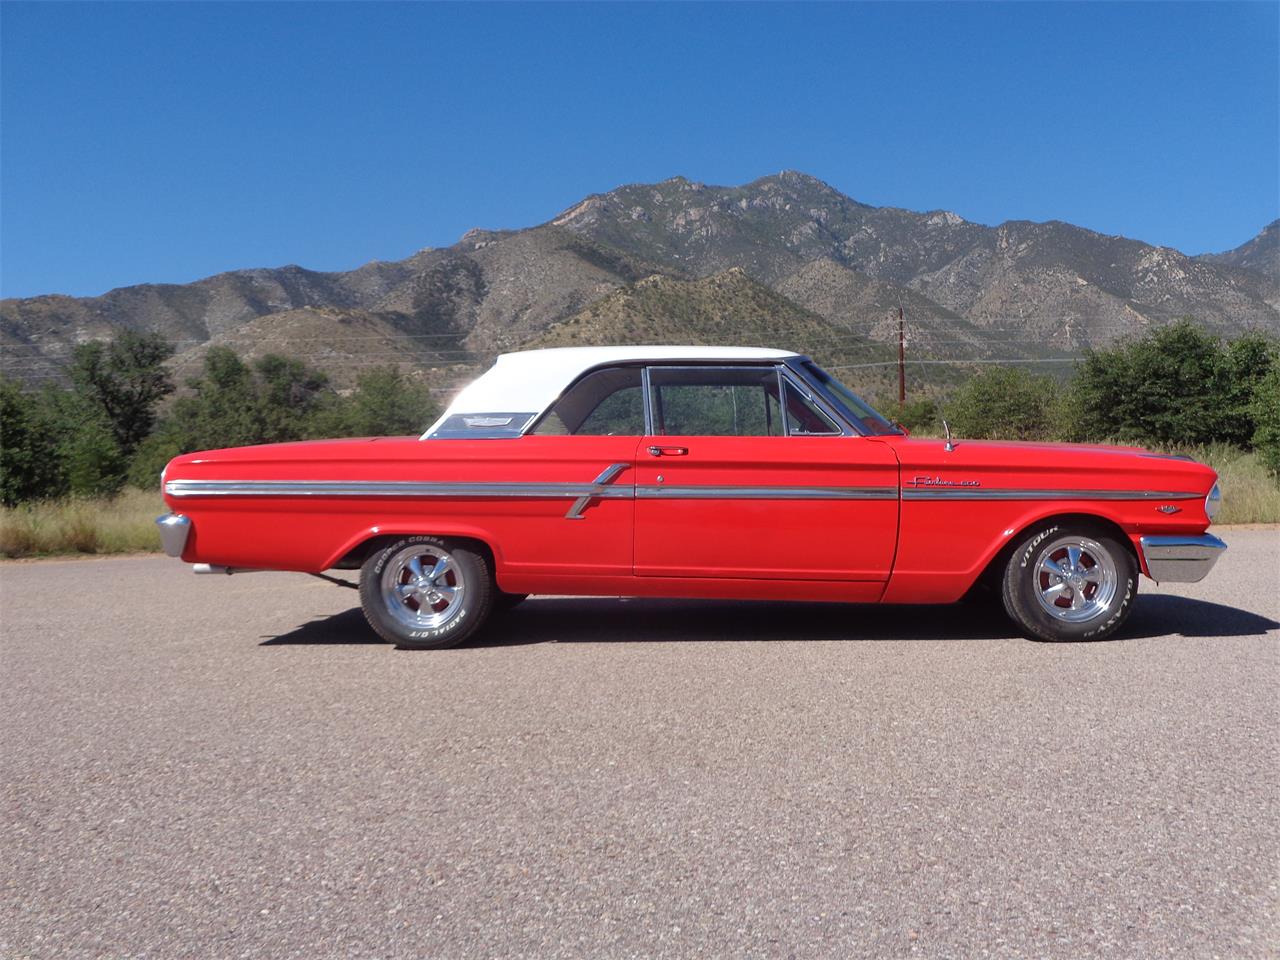 1964 ford fairlane 500 for sale classiccars com cc 1162087 1964 ford fairlane 500 for sale